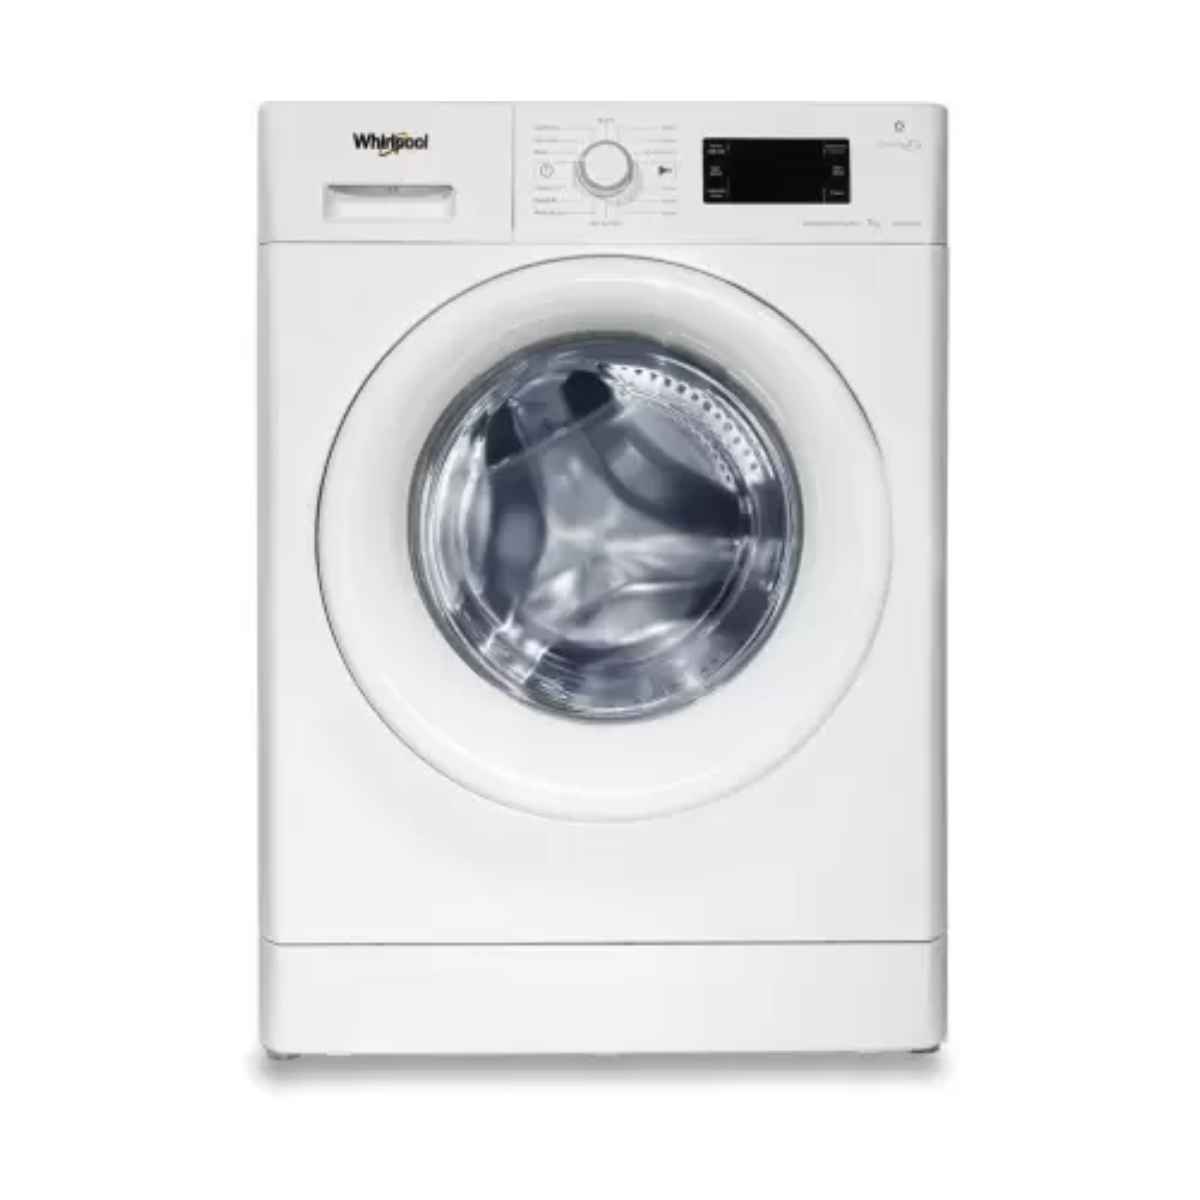 Whirlpool 7 kg Fully Automatic Front Load washing machine (Fresh Care 7212)